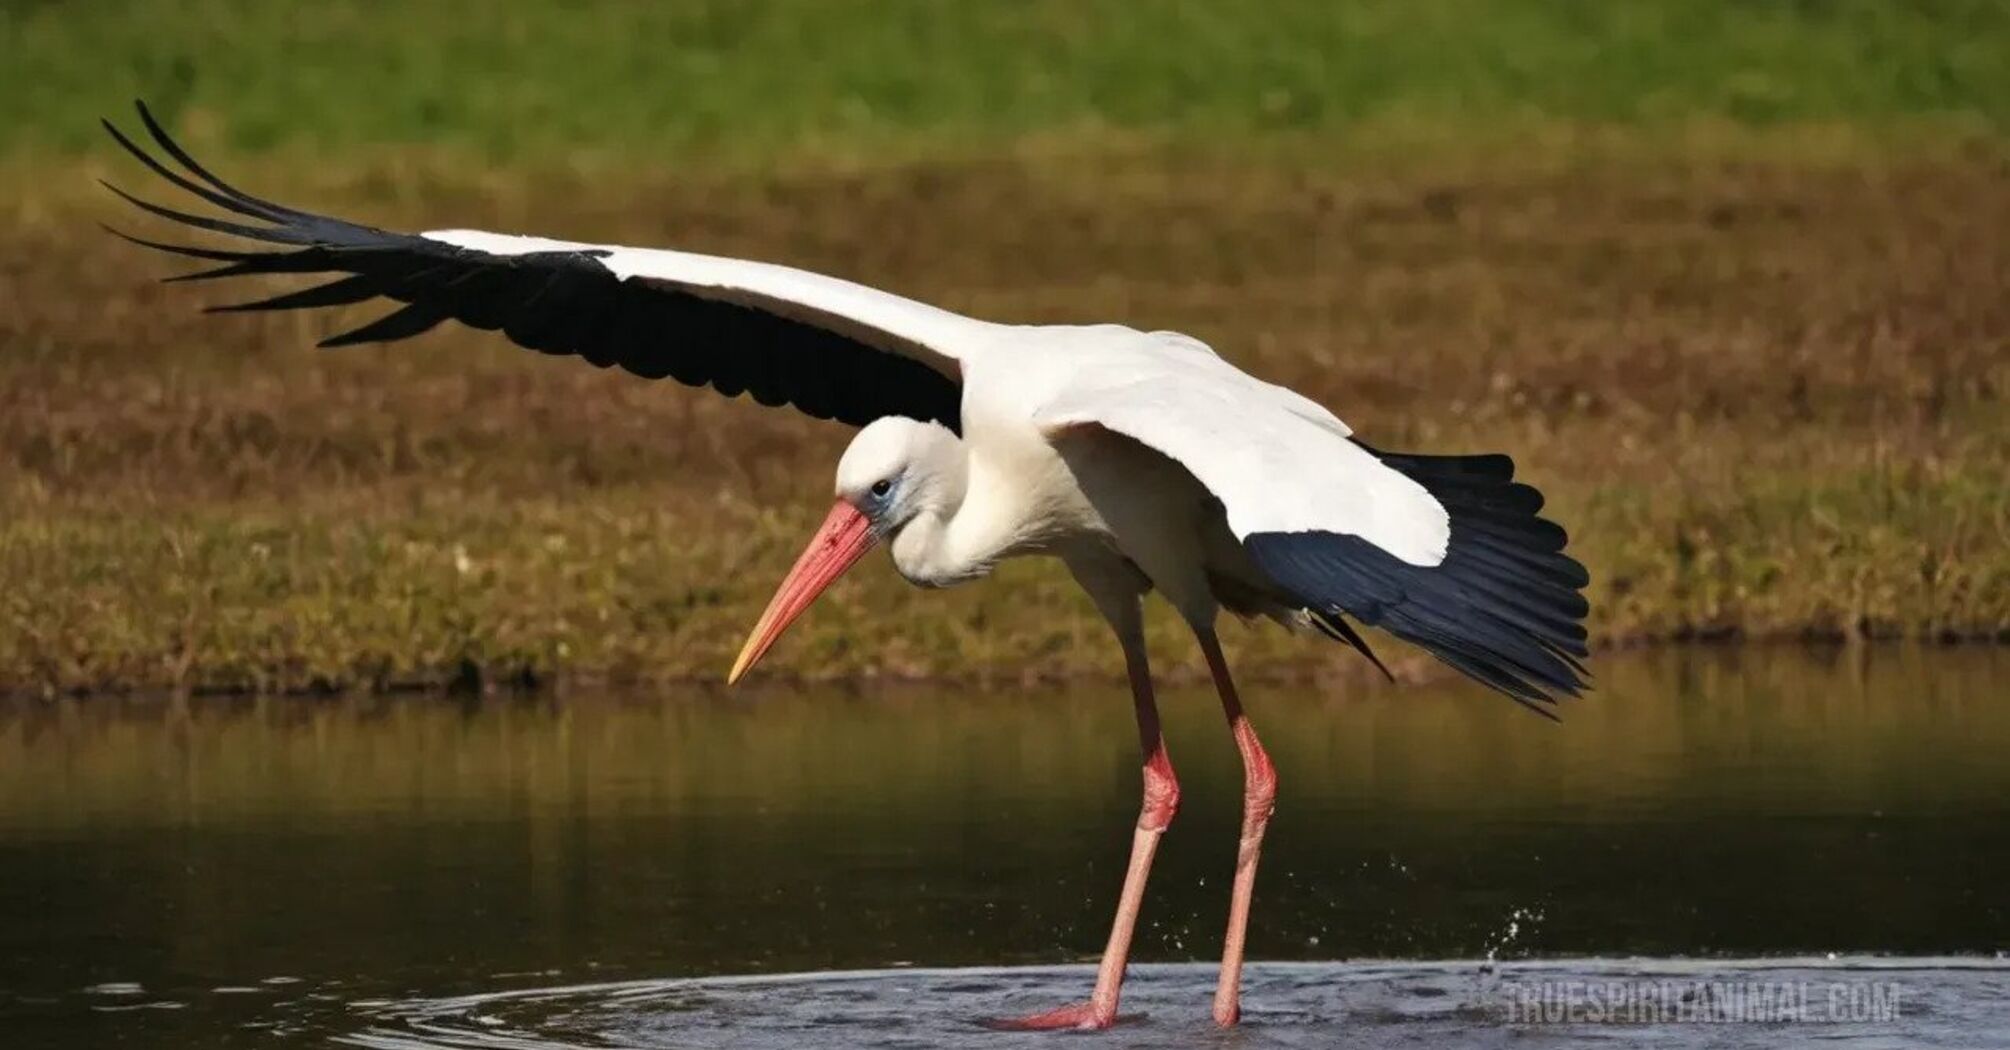 The symbolic meaning of storks